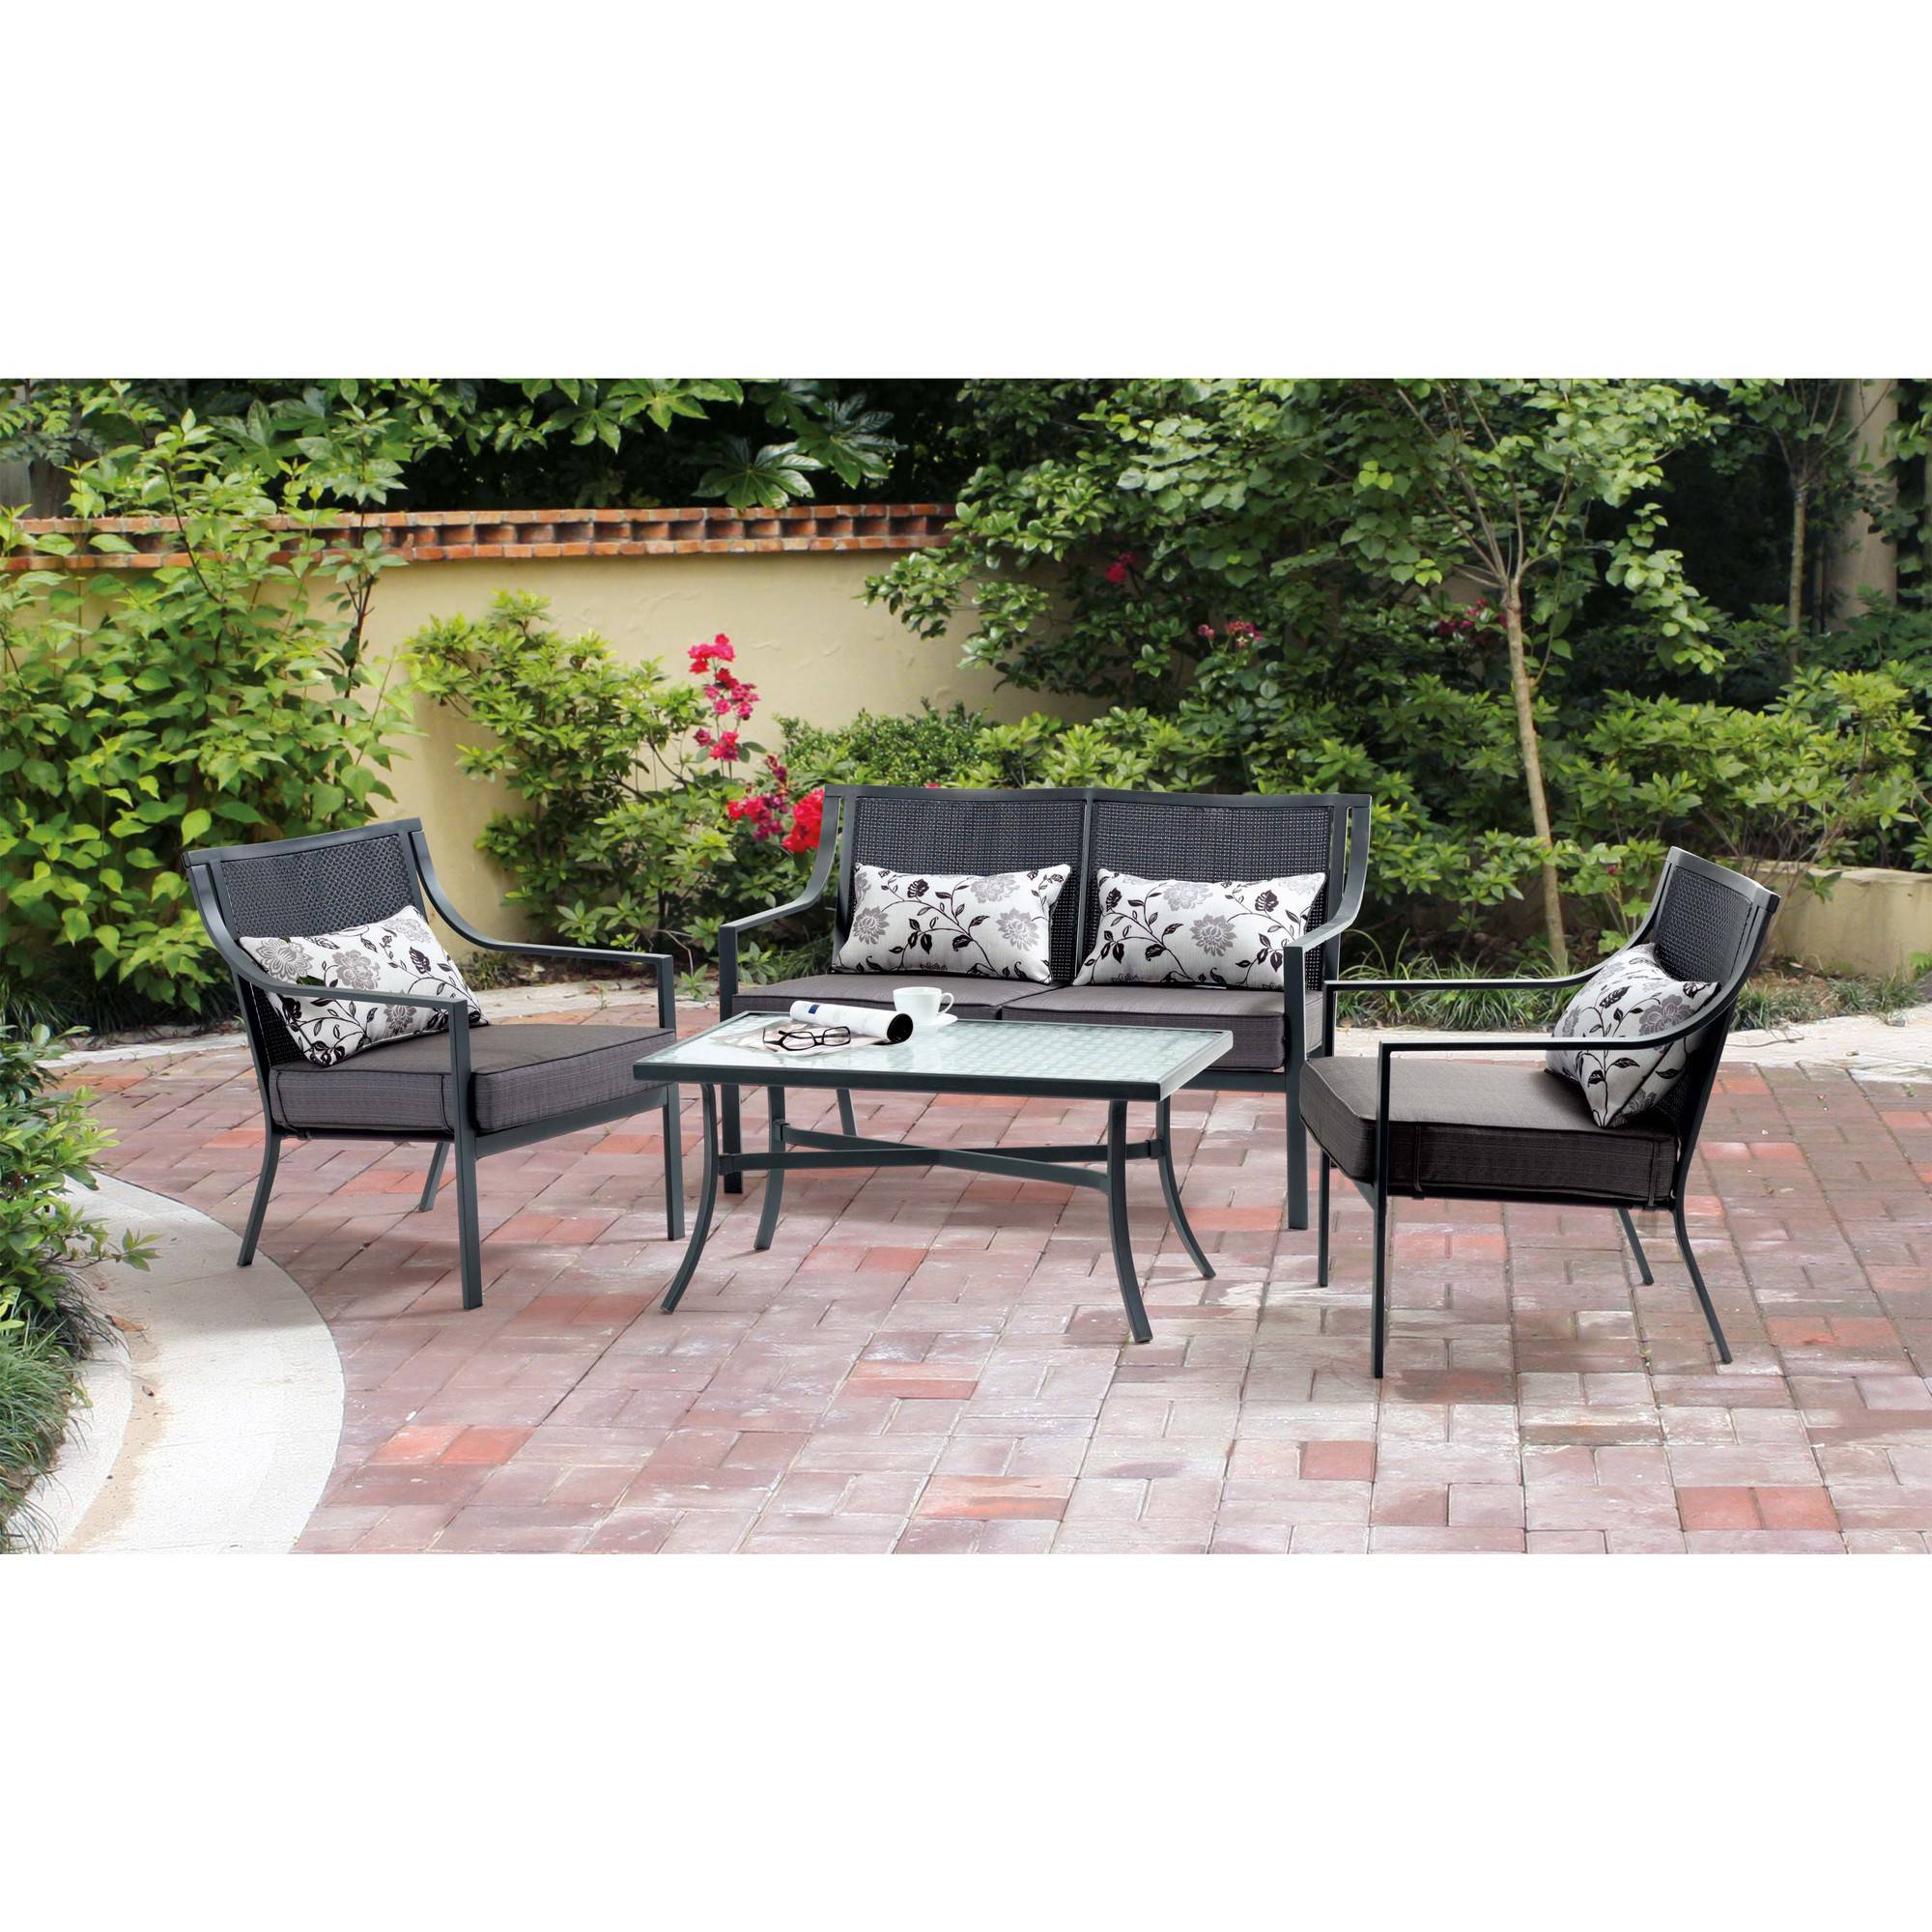 Mainstays Alexandra Square 4-Piece Patio Conversation Set, Grey with Leaves, Seats 4 with Gray Cushions - image 1 of 9